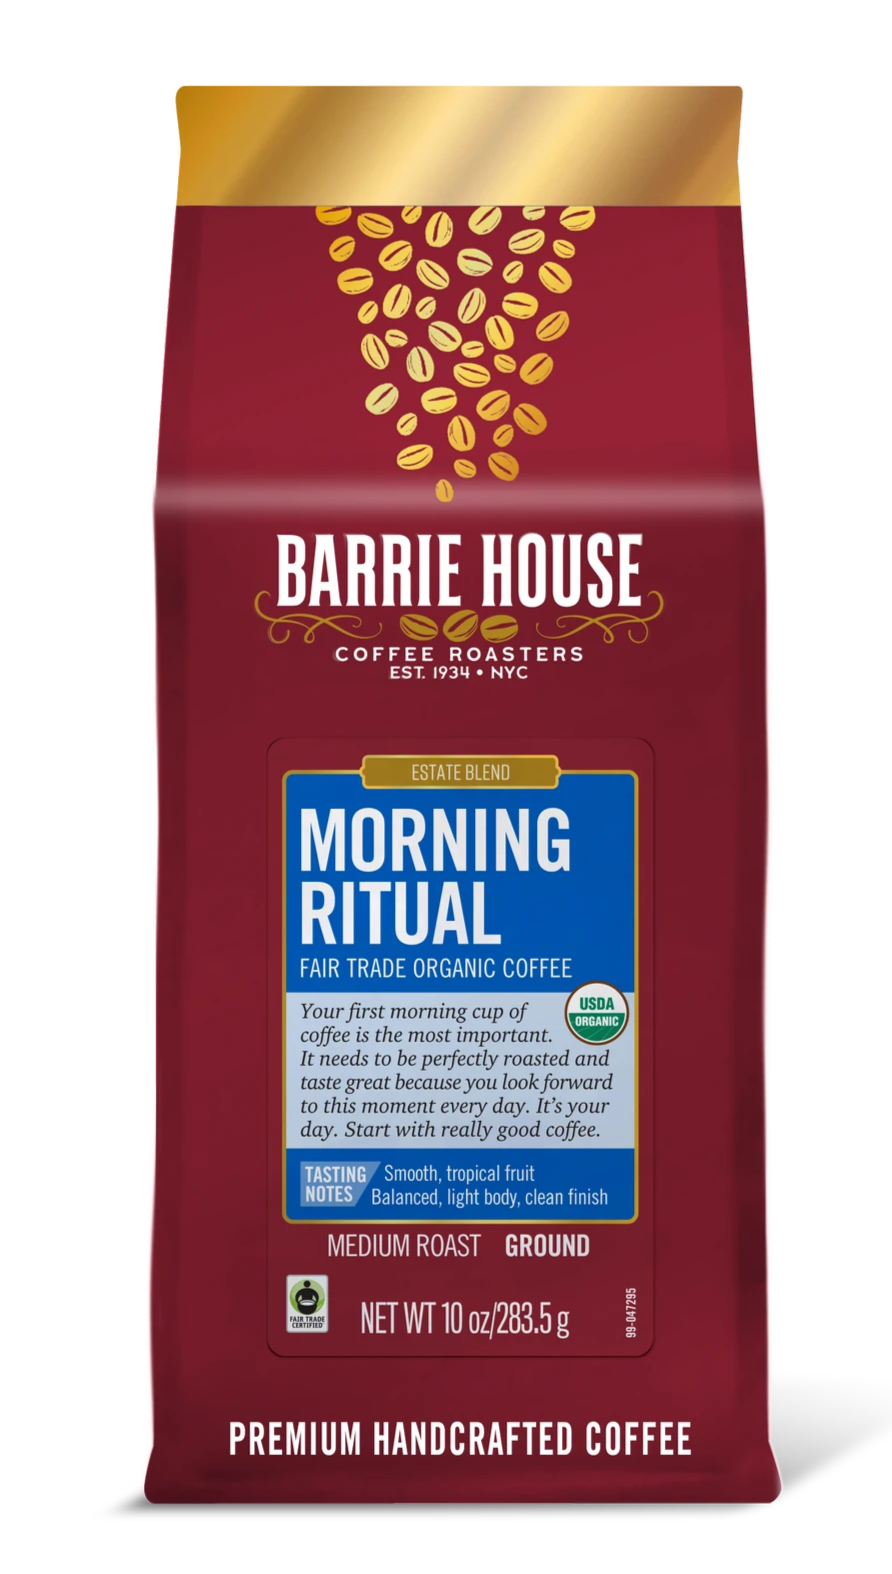 Barrie House Morning Ritual FTO Ground Coffee 10 oz